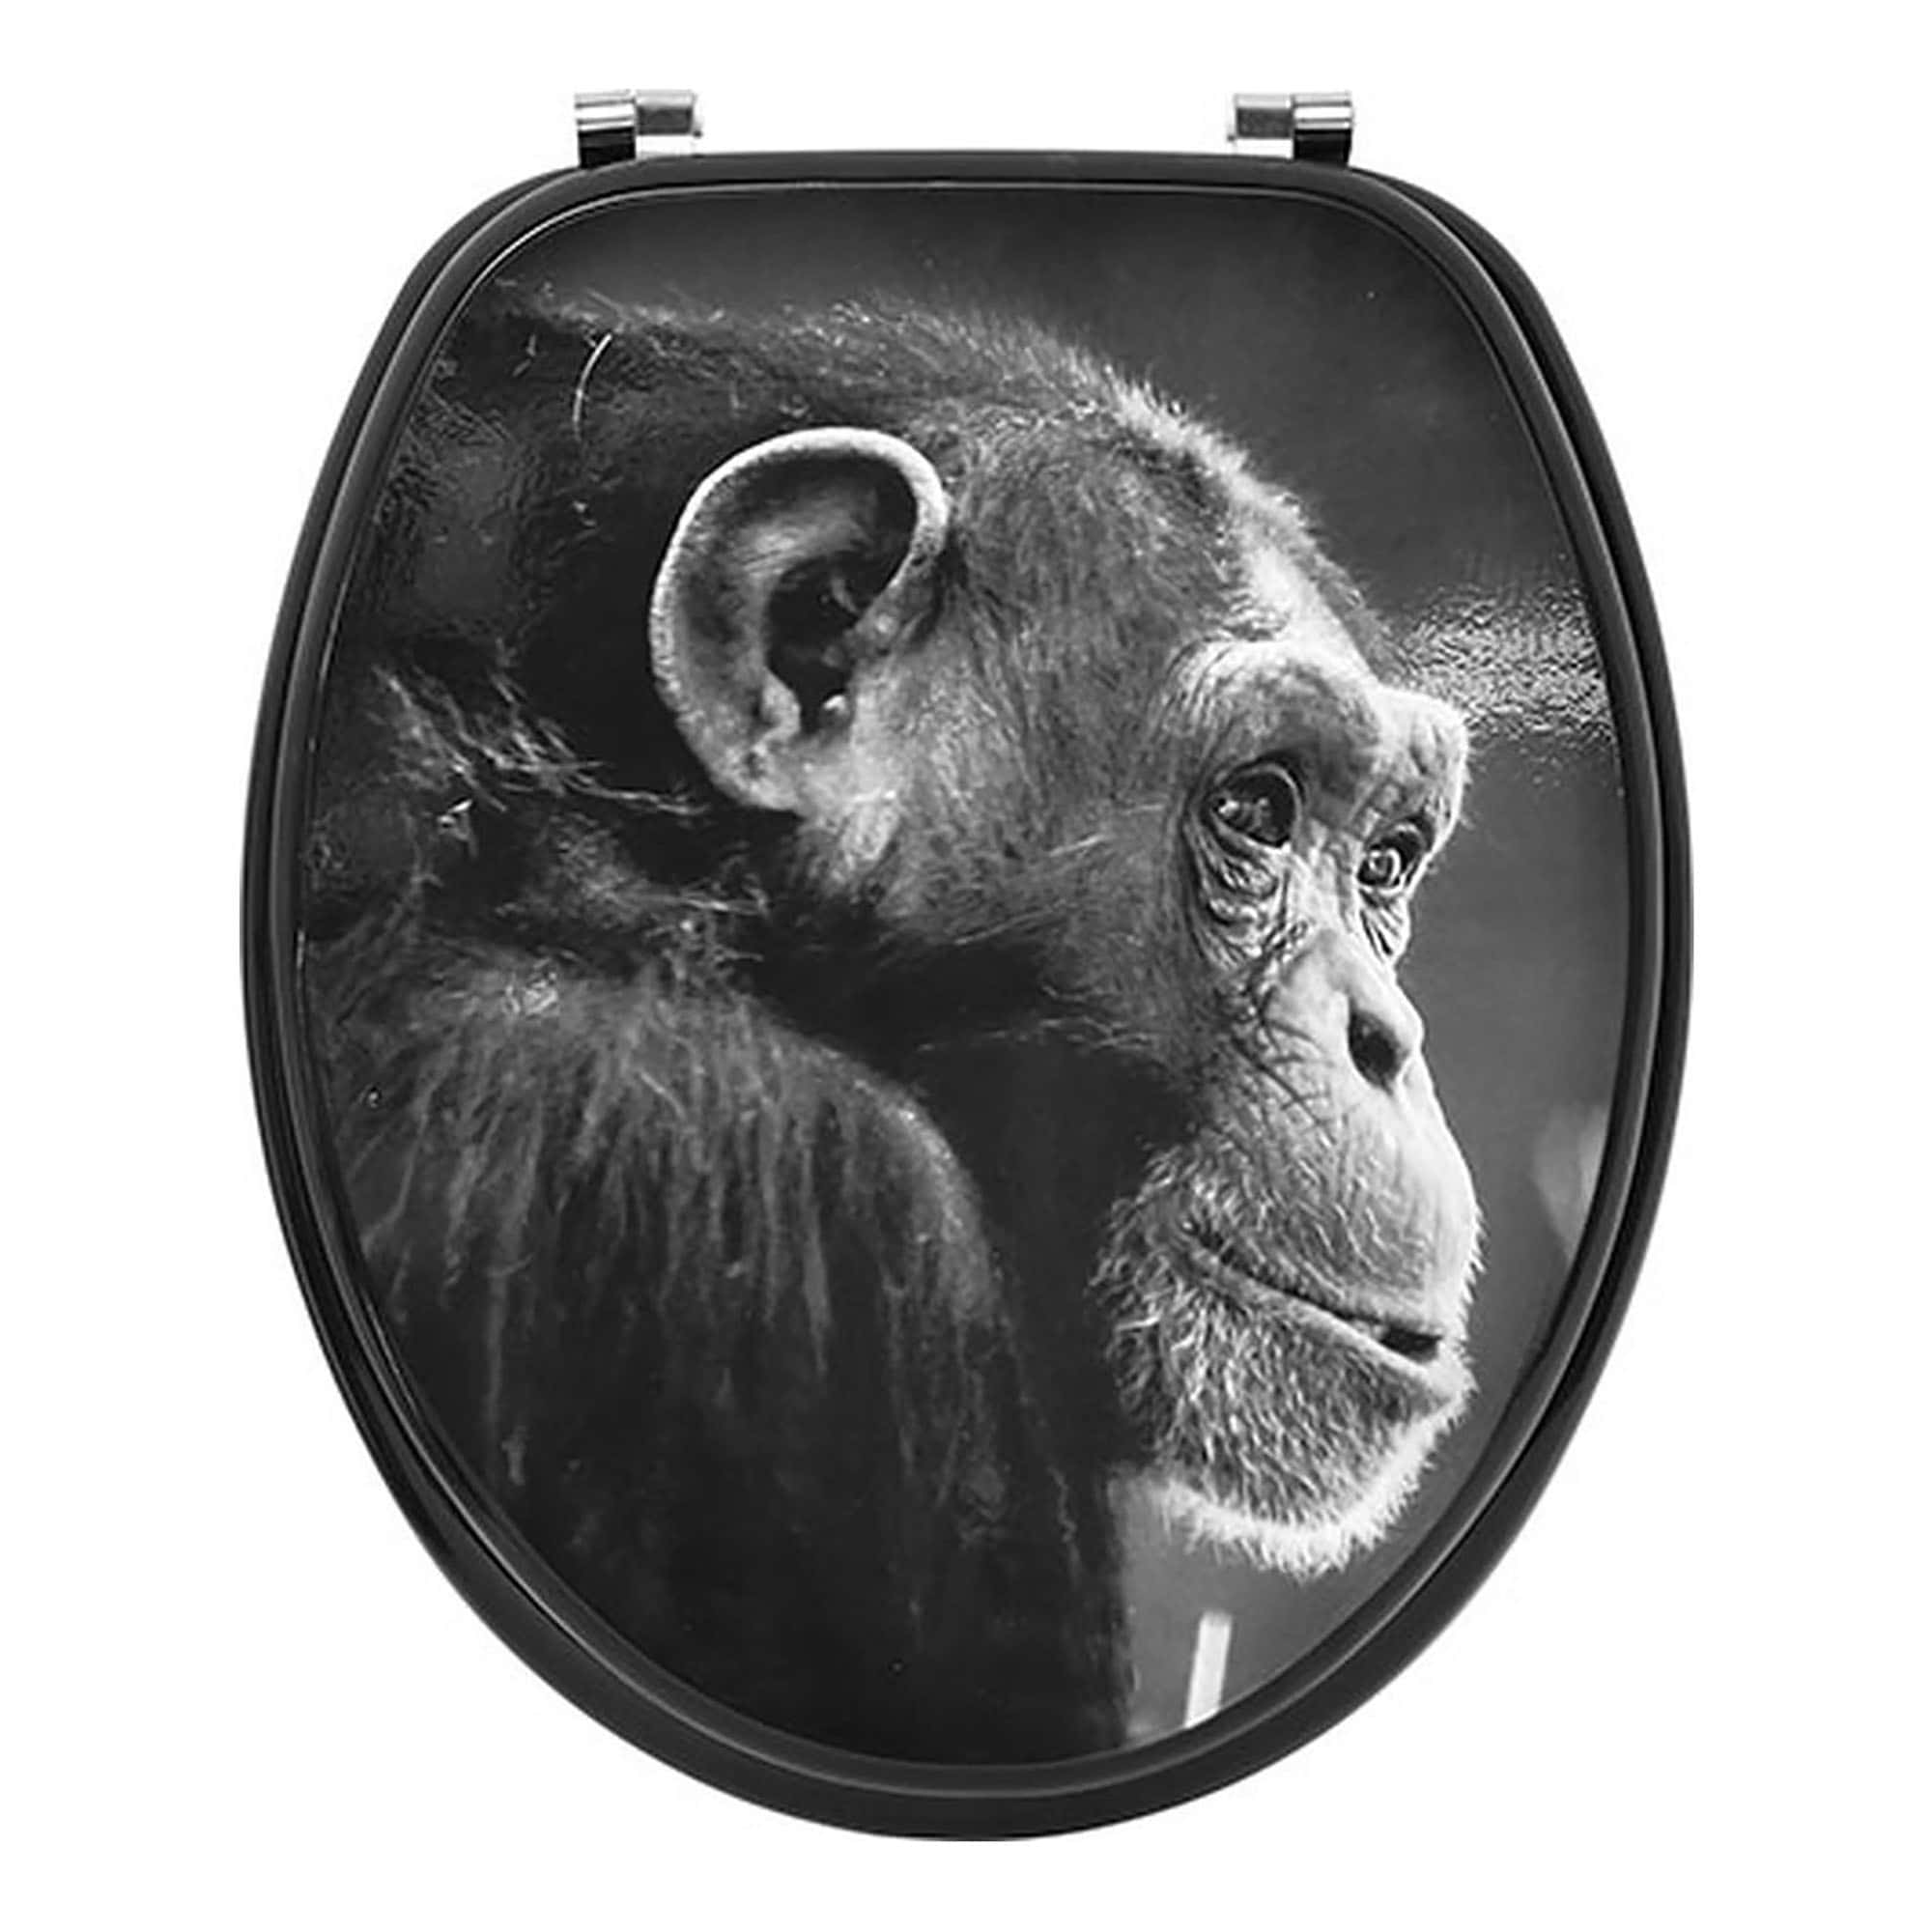 elongated toilet seat with primate design